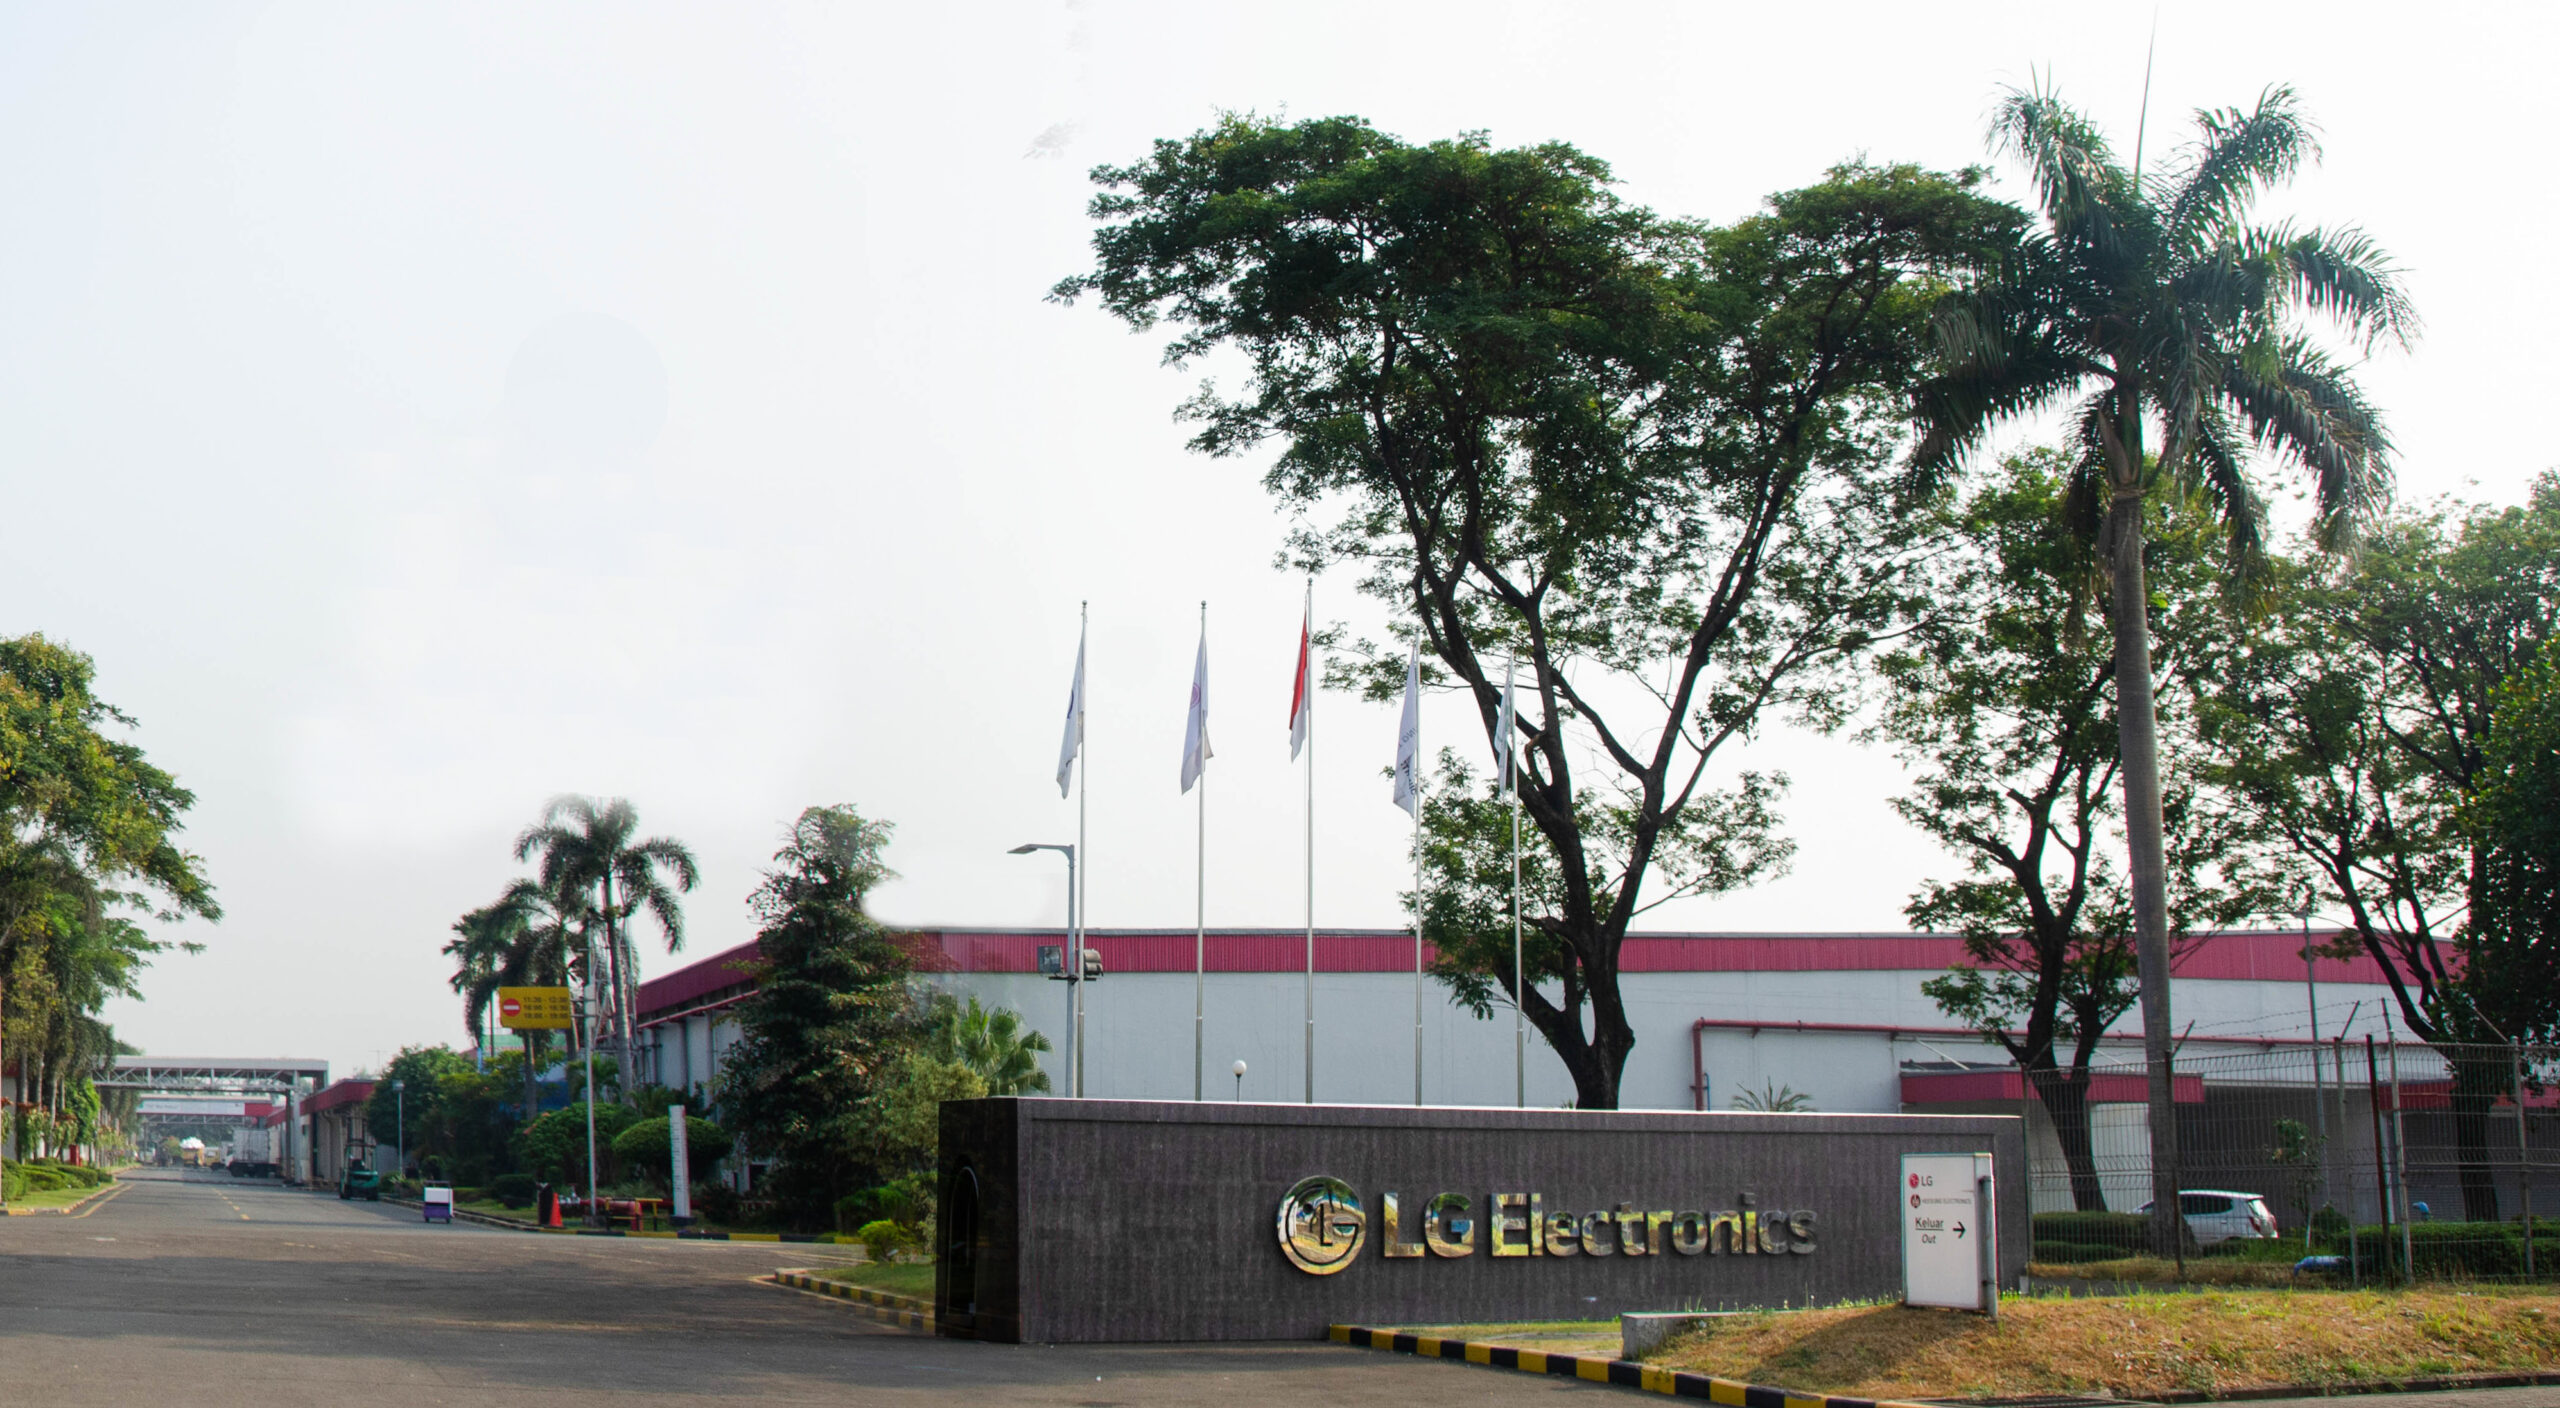 LG’s facility in Indonesia with some laborers working in the assembly line